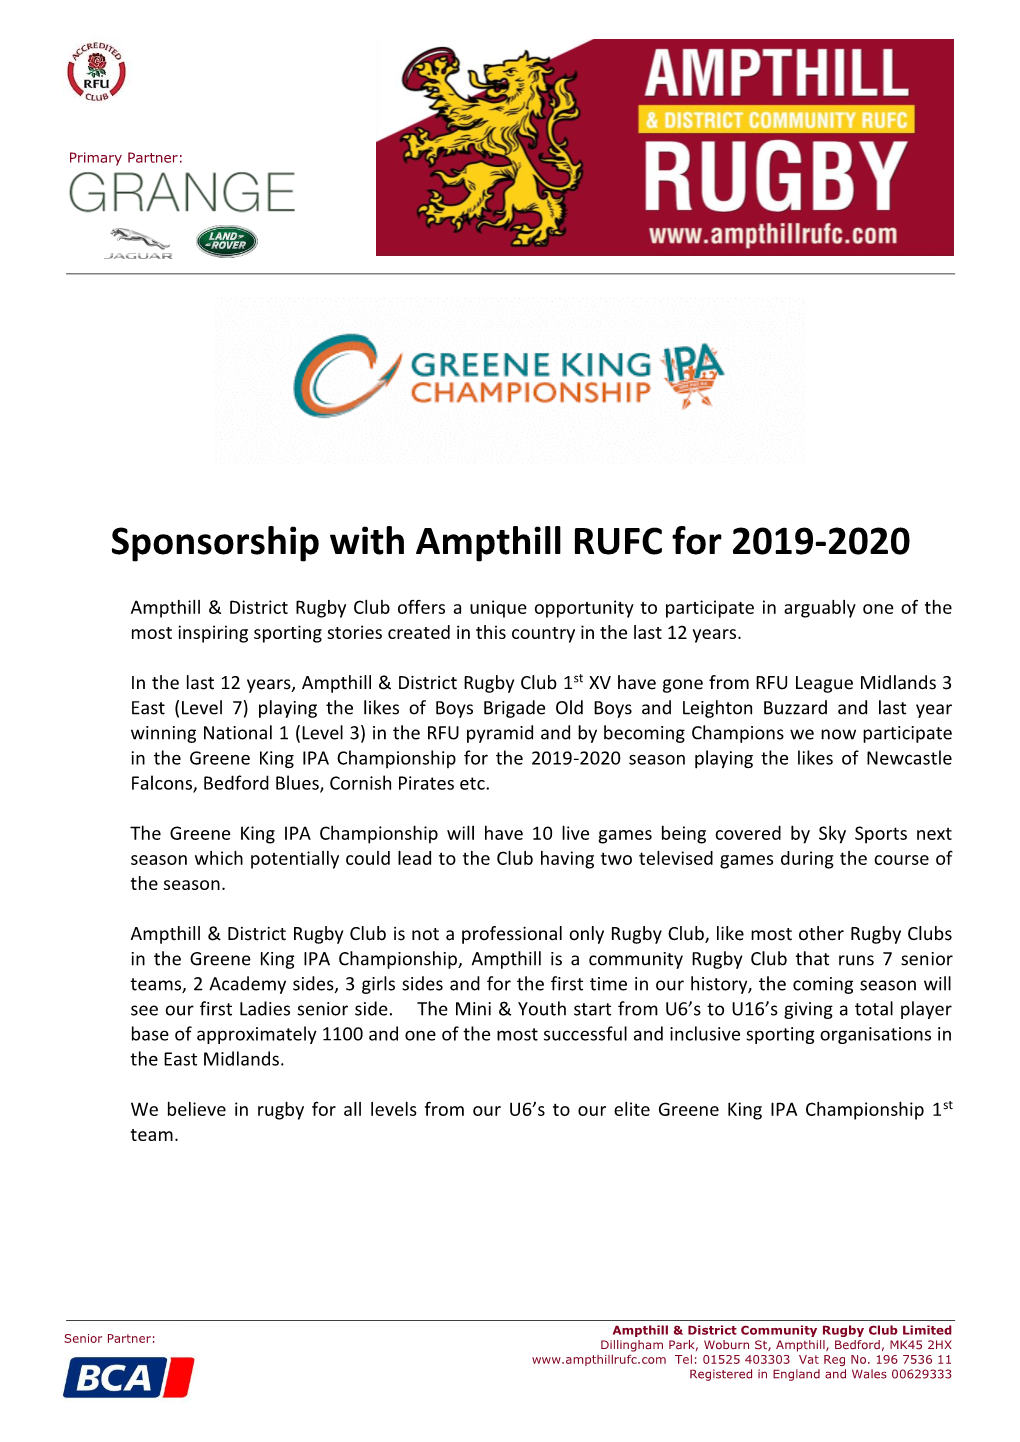 Sponsorship with Ampthill RUFC for 2019-2020